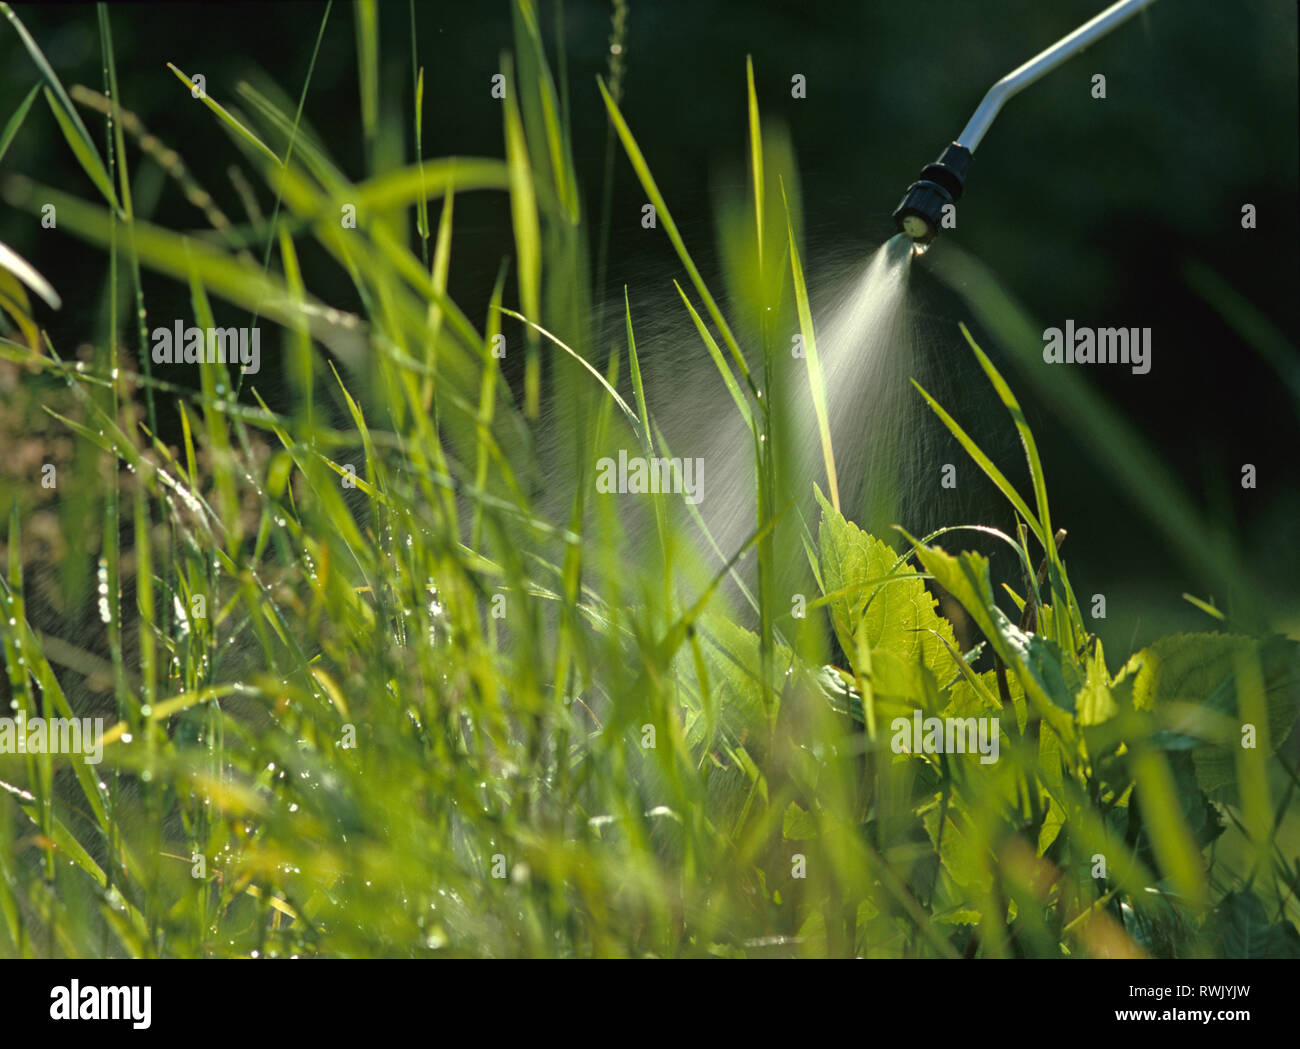 Spray from a hand-held garden sprayer showing nozzle and weeds Stock Photo